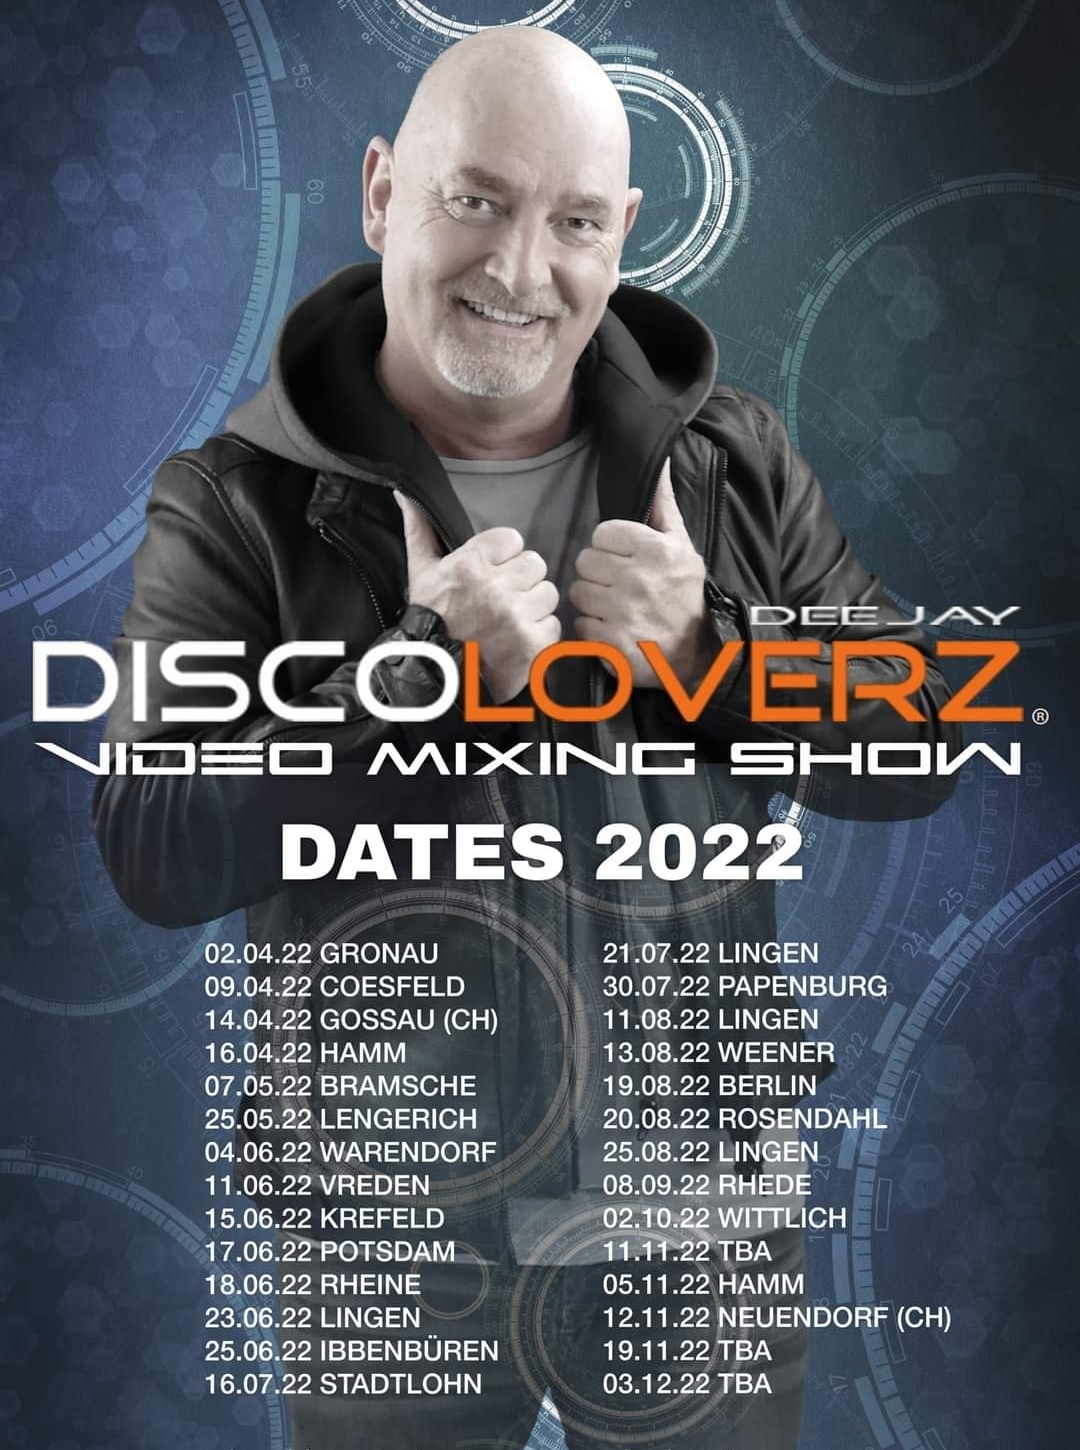 DISCOLOVERZ Video Mixing Show am 16.07.2022